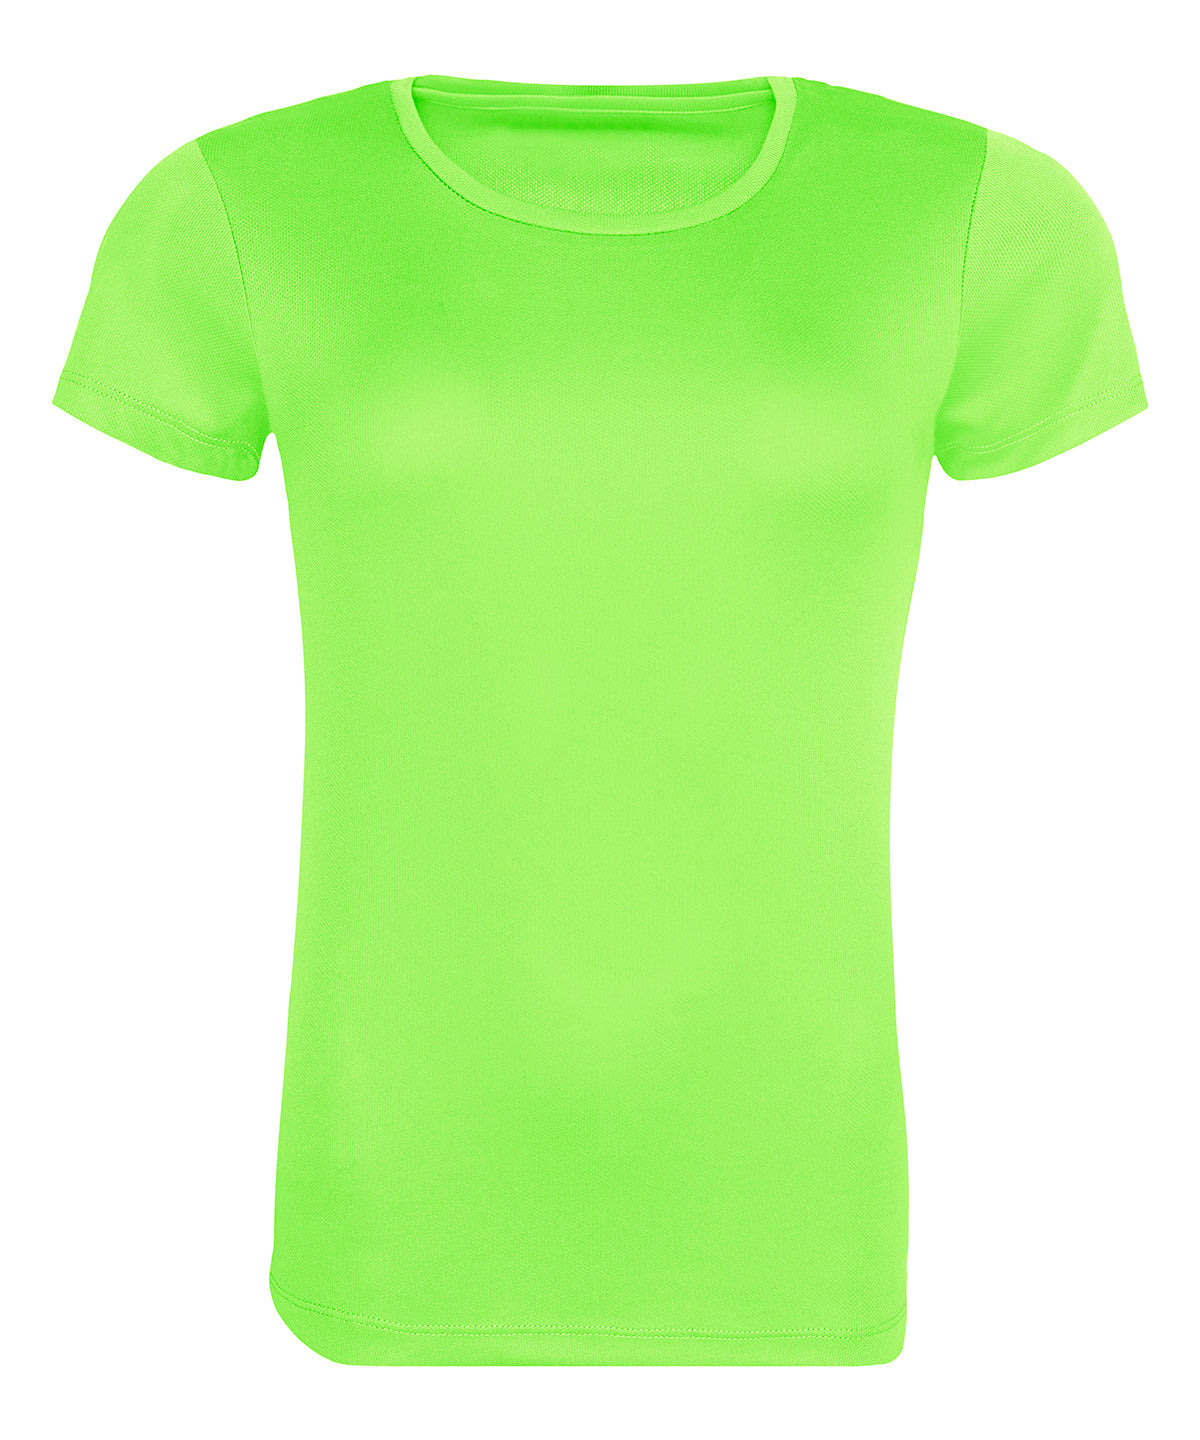 Women's Recycled Cool T